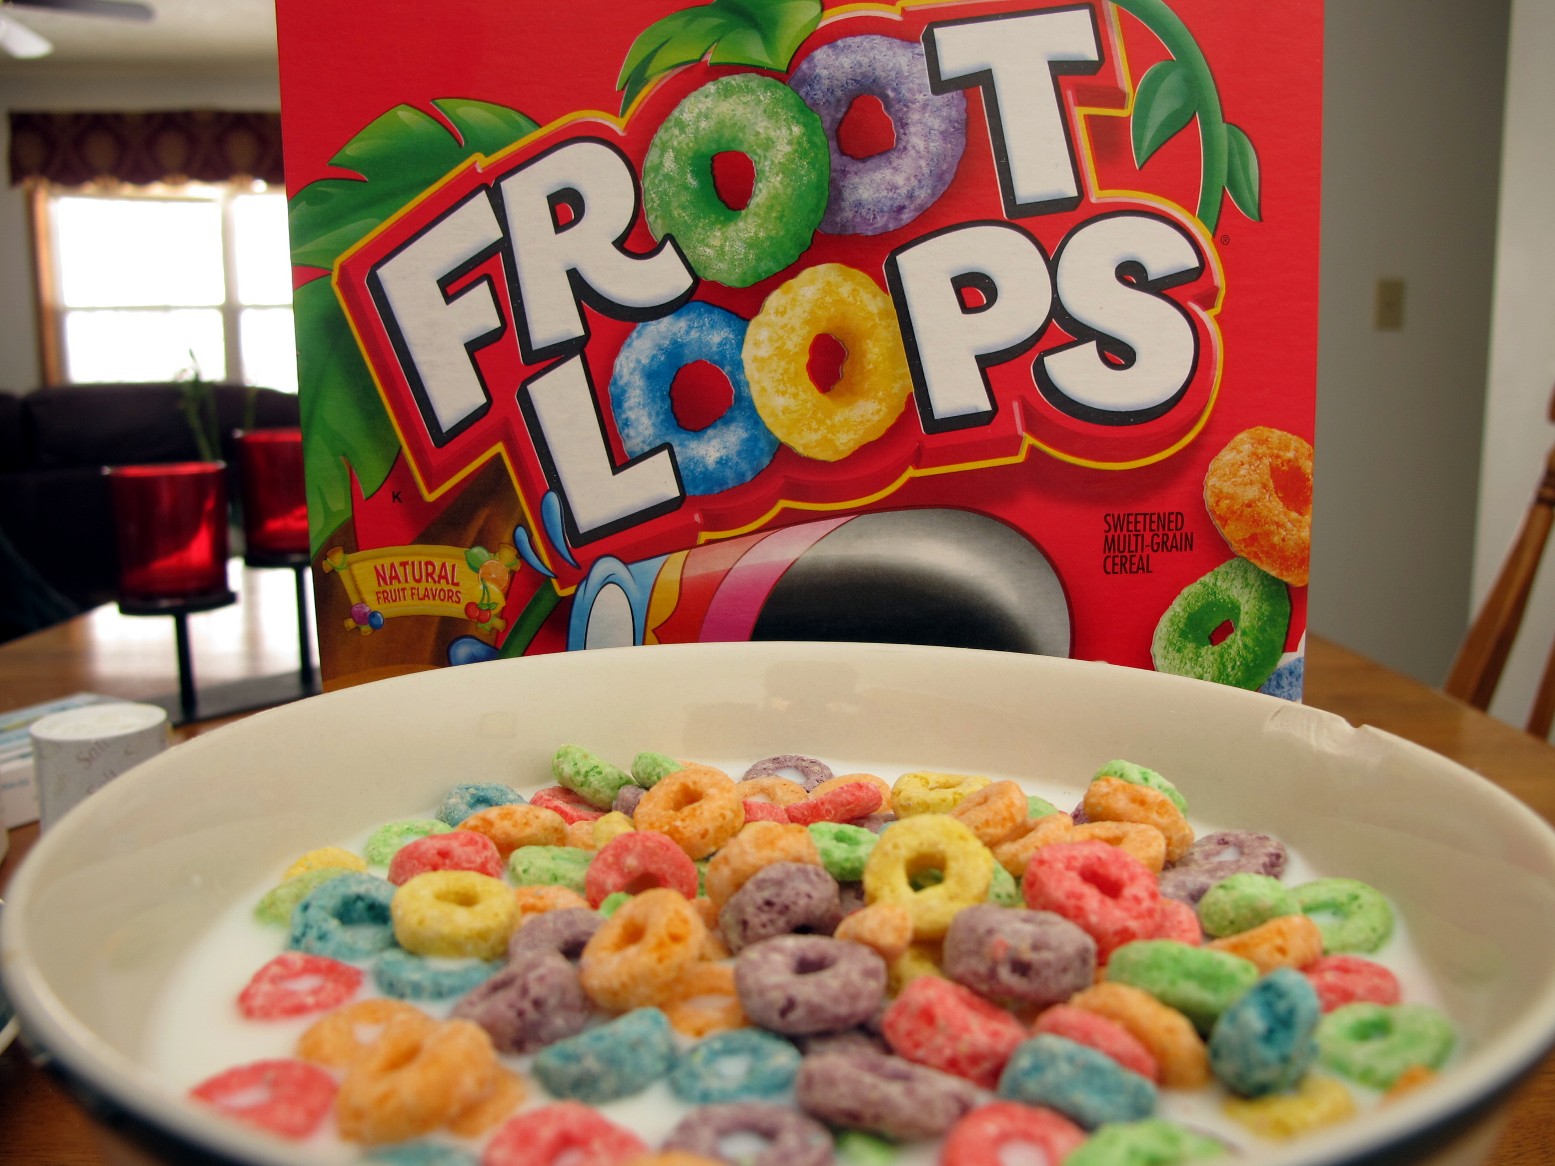 Do you have a Froot Loops deficiency?